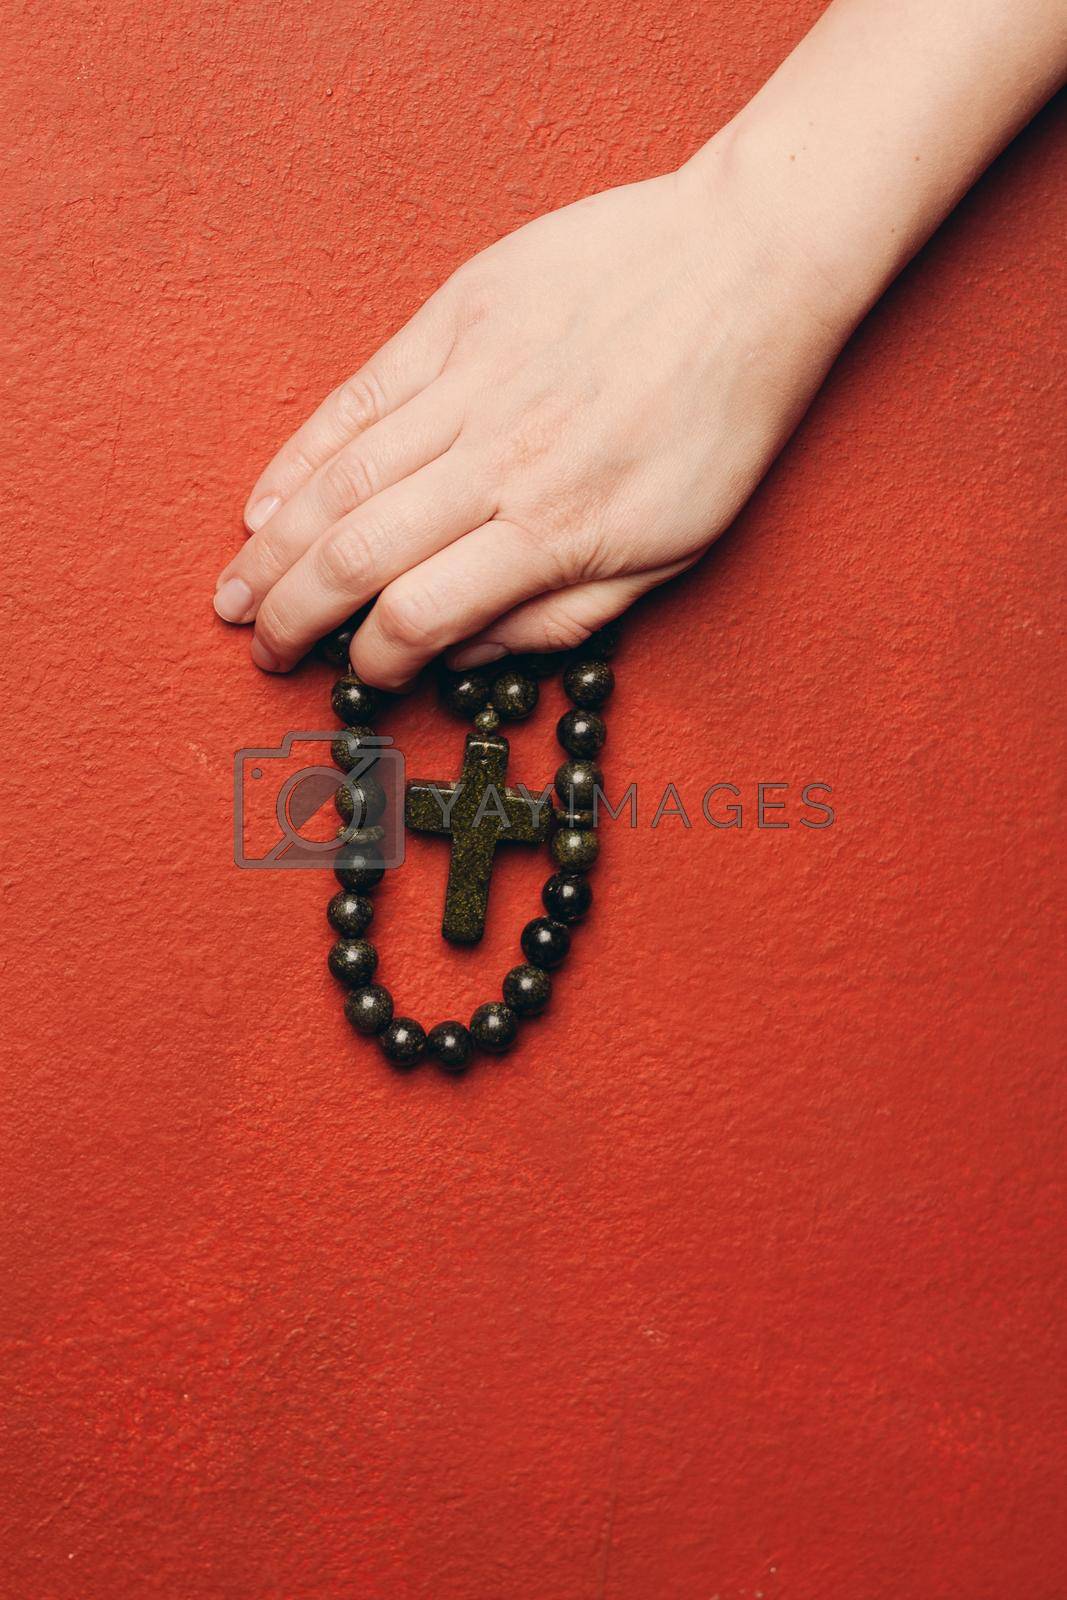 Royalty free image of rosary beads with a cross catholicism christianity by Vichizh